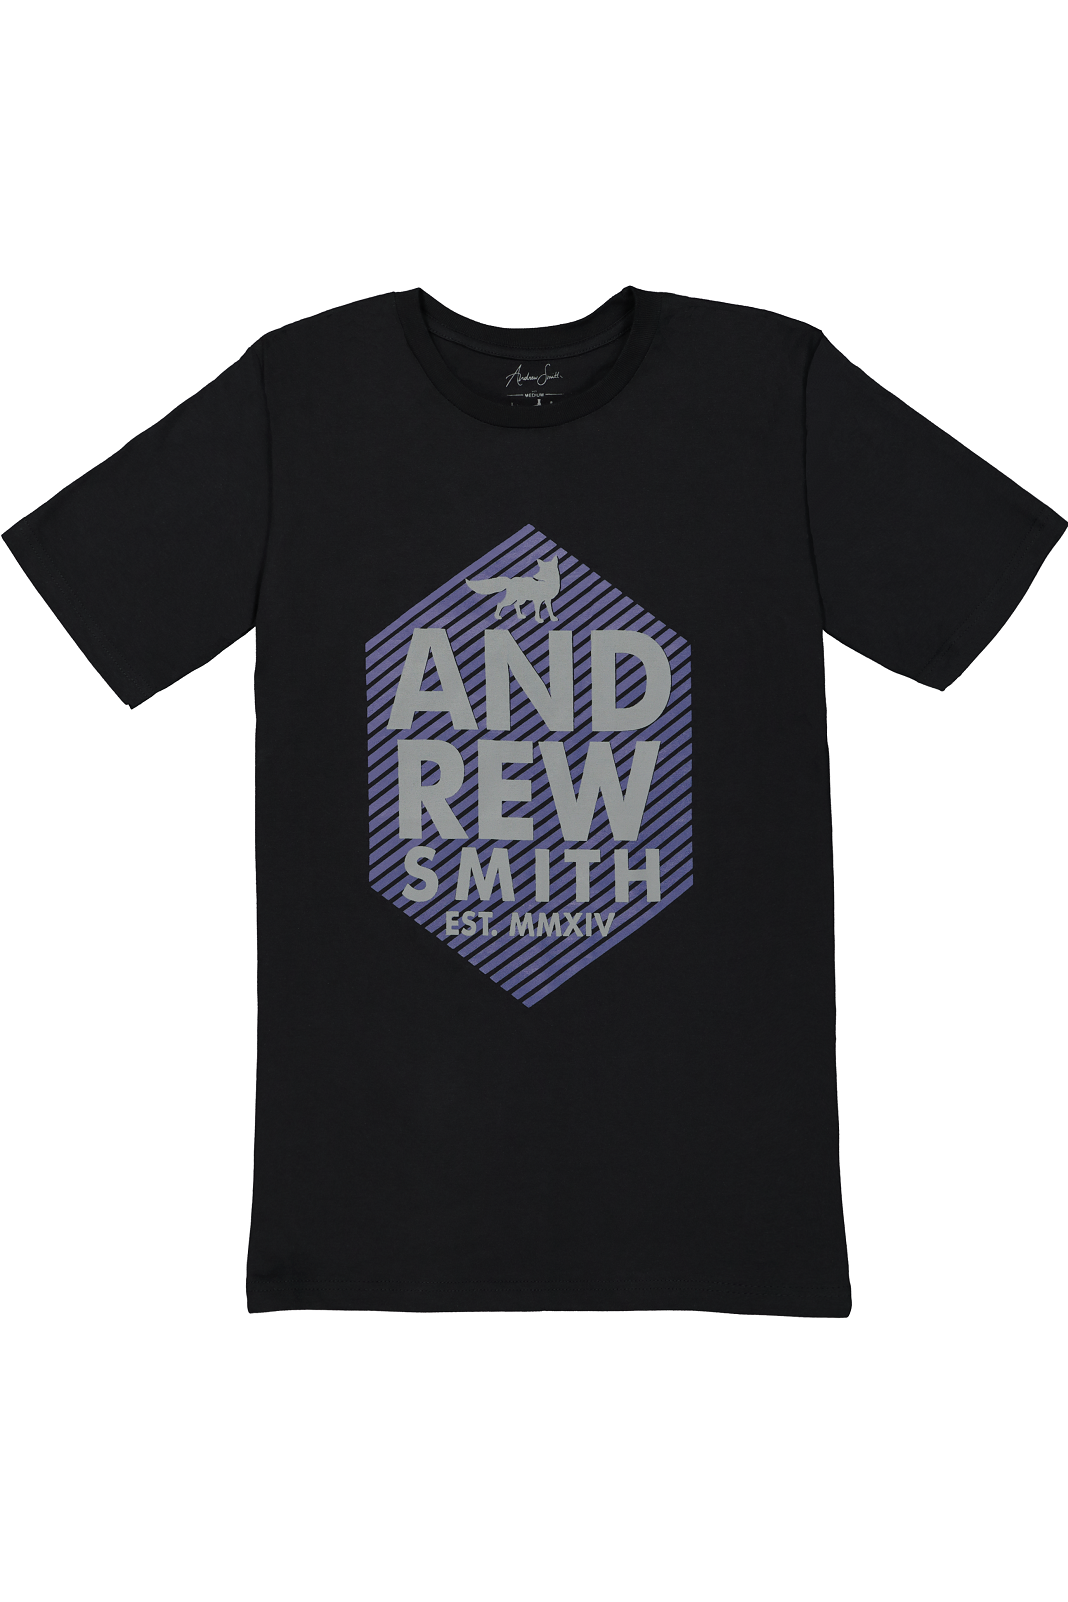 Andrew Smith T-Shirt Slim Fit Pria A0113X01A